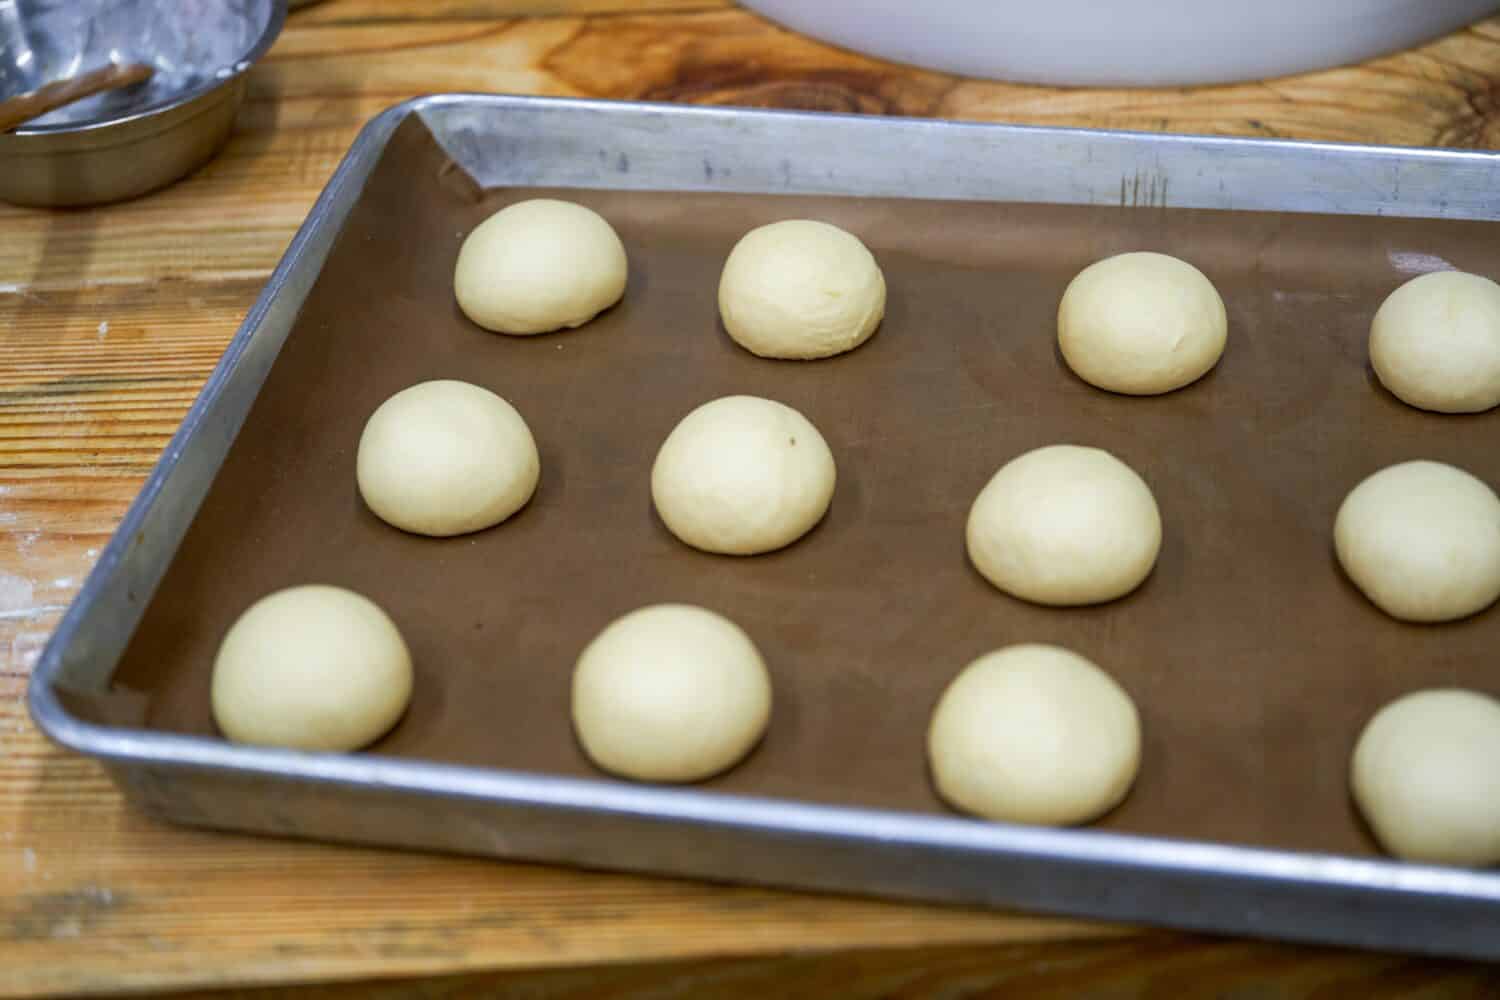 Are Baking Pans And Cookie Sheets Interchangeable?